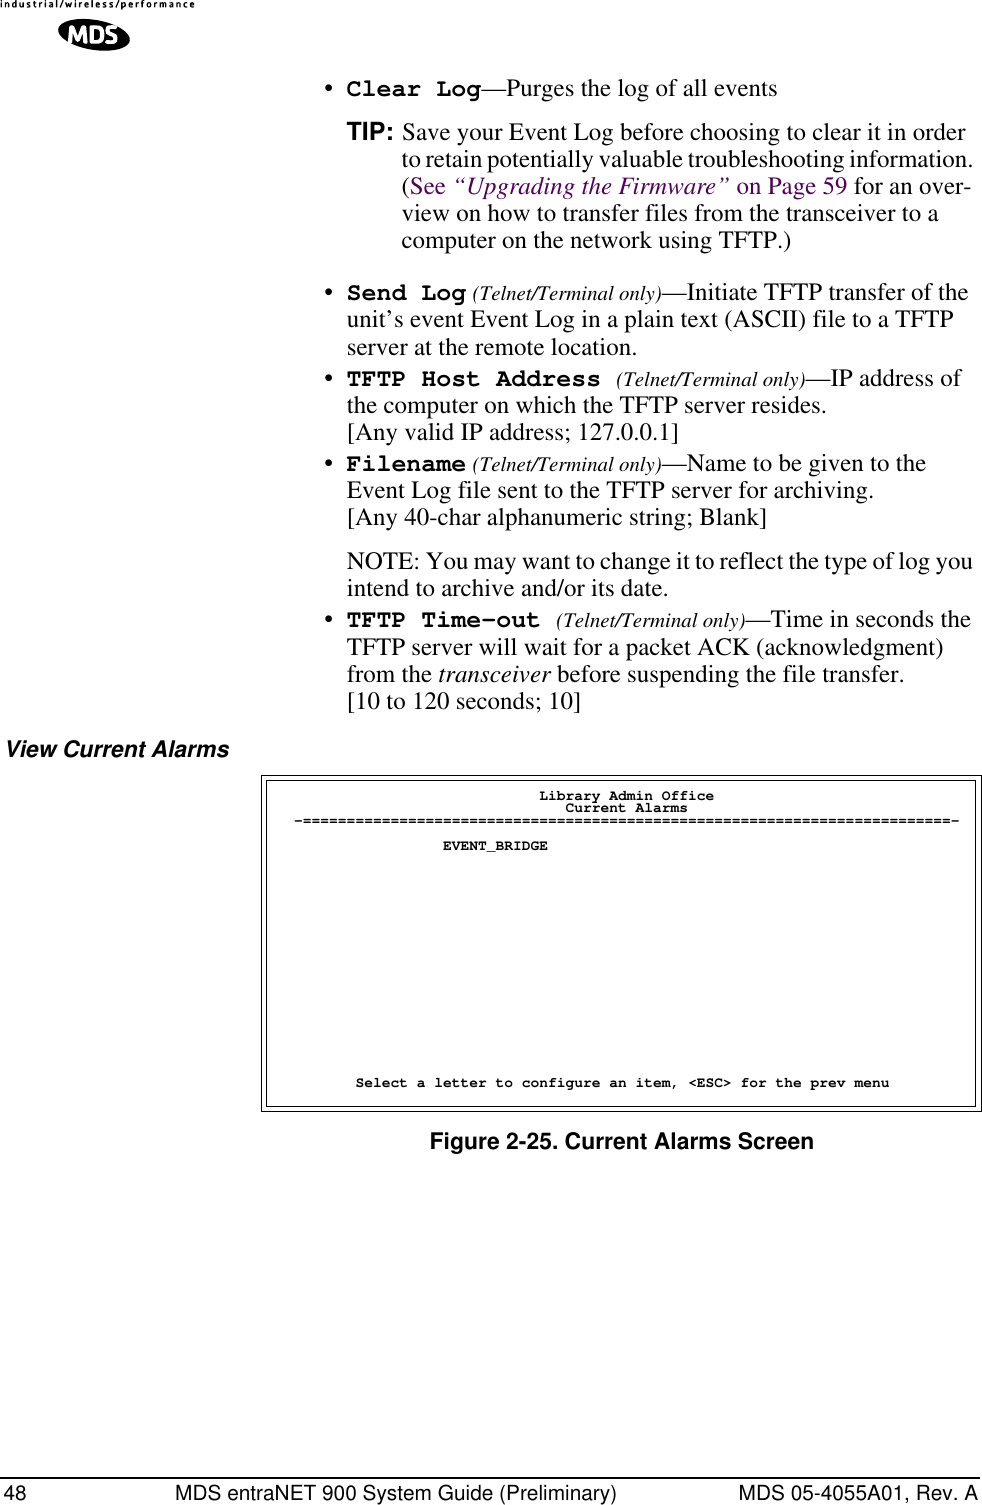 48 MDS entraNET 900 System Guide (Preliminary) MDS 05-4055A01, Rev. A•Clear Log—Purges the log of all eventsTIP: Save your Event Log before choosing to clear it in order to retain potentially valuable troubleshooting information. (See “Upgrading the Firmware” on Page 59 for an over-view on how to transfer files from the transceiver to a computer on the network using TFTP.)•Send Log (Telnet/Terminal only)—Initiate TFTP transfer of the unit’s event Event Log in a plain text (ASCII) file to a TFTP server at the remote location.•TFTP Host Address (Telnet/Terminal only)—IP address of the computer on which the TFTP server resides. [Any valid IP address; 127.0.0.1]•Filename (Telnet/Terminal only)—Name to be given to the Event Log file sent to the TFTP server for archiving. [Any 40-char alphanumeric string; Blank]NOTE: You may want to change it to reflect the type of log you intend to archive and/or its date. •TFTP Time-out (Telnet/Terminal only)—Time in seconds the TFTP server will wait for a packet ACK (acknowledgment) from the transceiver before suspending the file transfer.[10 to 120 seconds; 10]View Current AlarmsFigure 2-25. Current Alarms Screen                              Library Admin Office                                 Current Alarms  -==========================================================================-                   EVENT_BRIDGE         Select a letter to configure an item, &lt;ESC&gt; for the prev menu